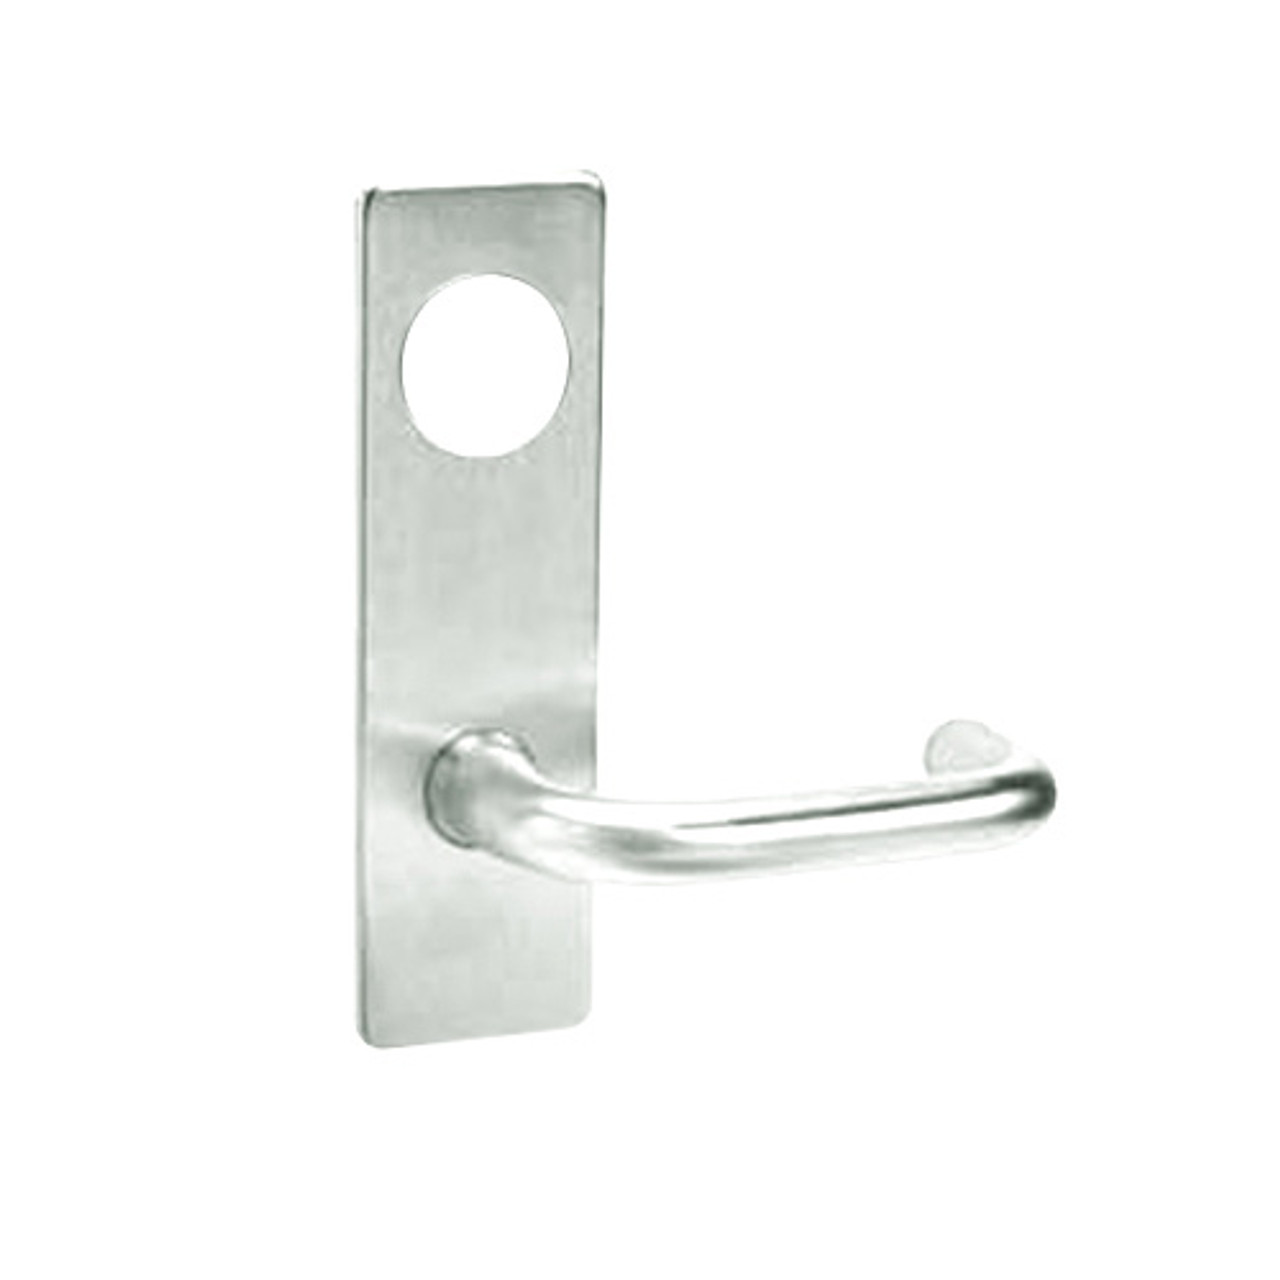 ML2058-LSP-618-LC Corbin Russwin ML2000 Series Mortise Entrance Holdback Locksets with Lustra Lever in Bright Nickel